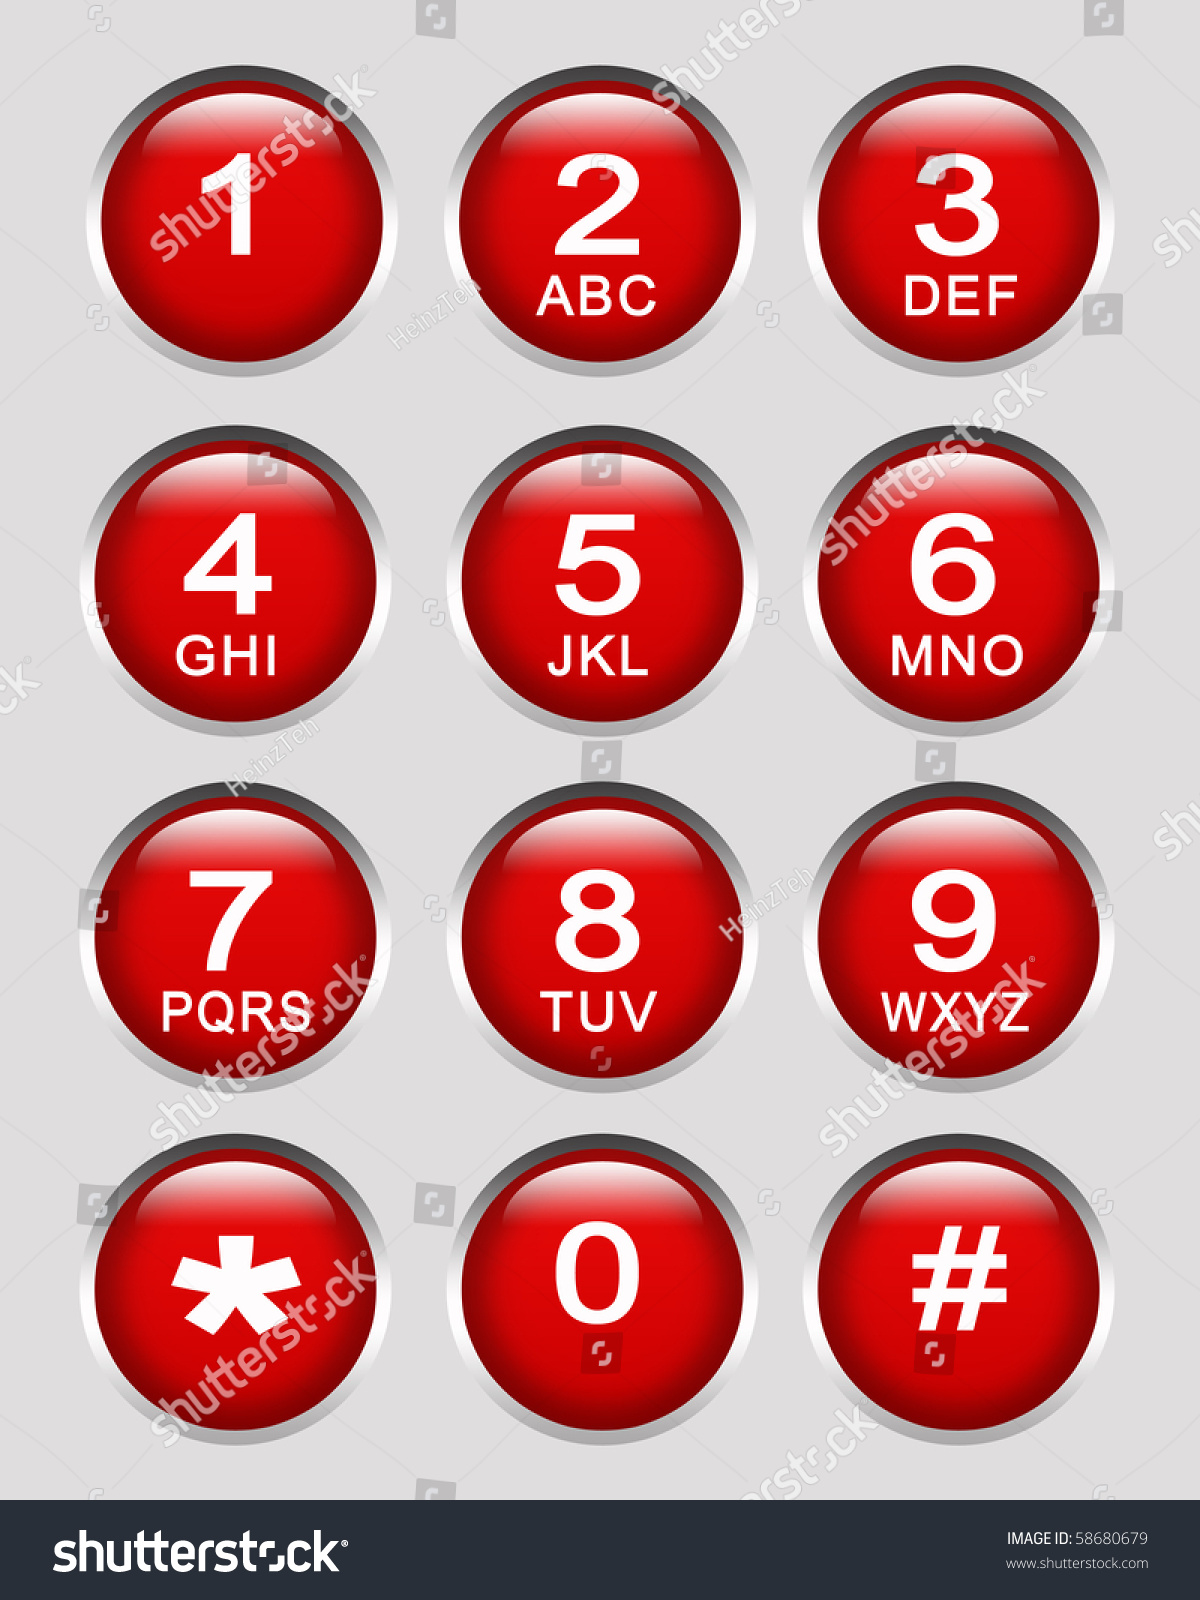 Number Key Pad Stock Photo 58680679 : Shutterstock